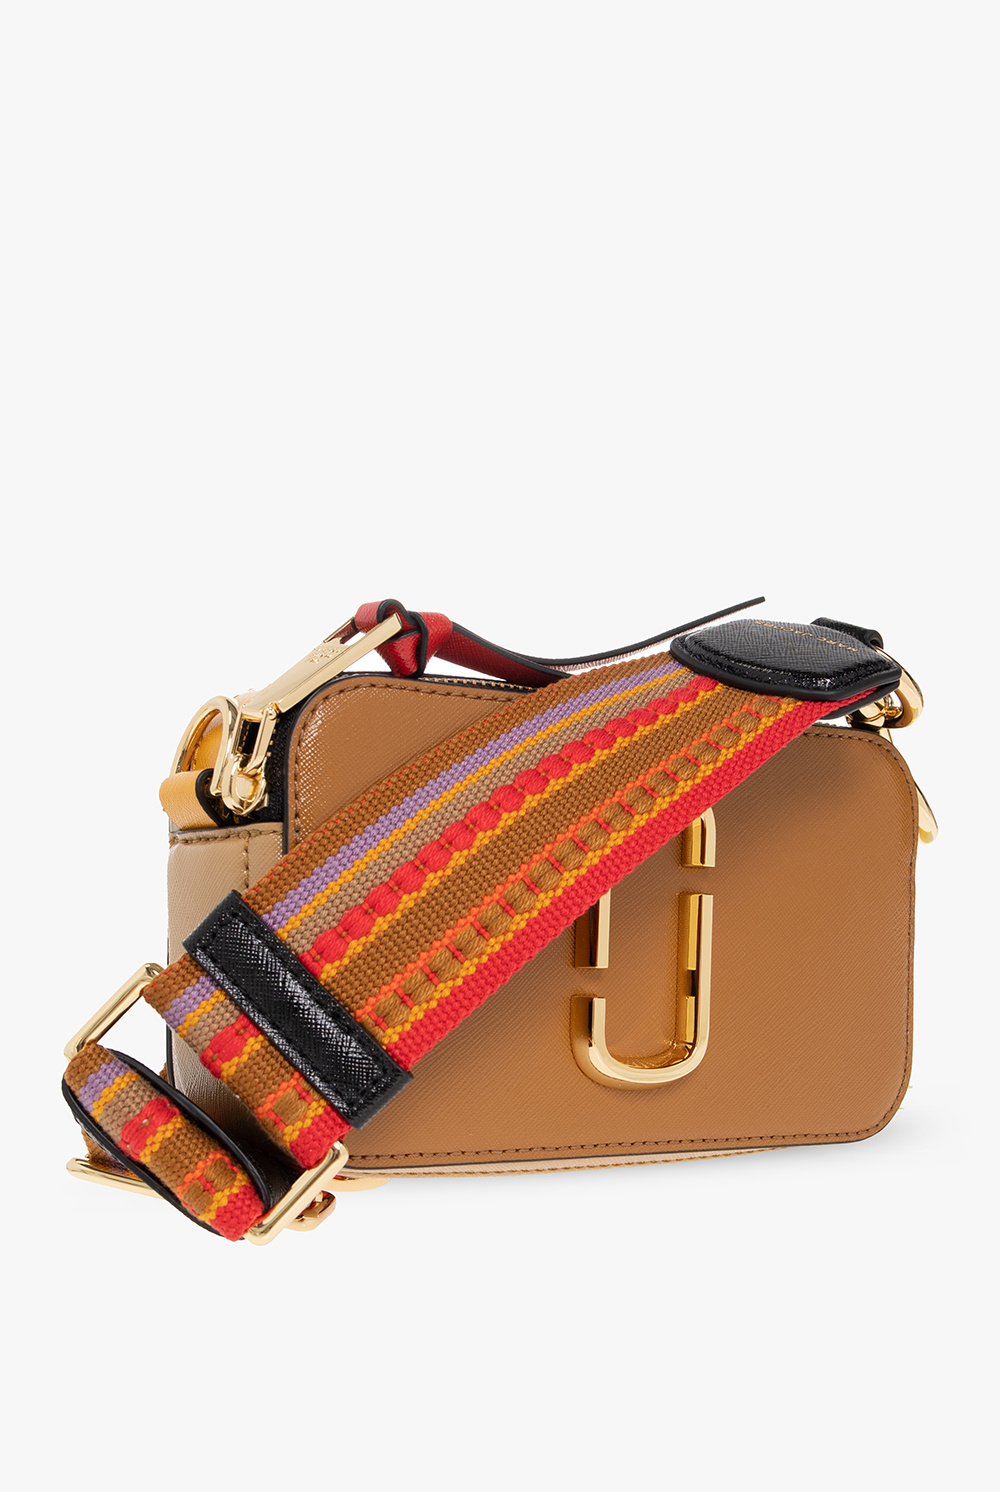 Marc Jacobs Brown/Black Leather & Fabric The Softshot Crossbody